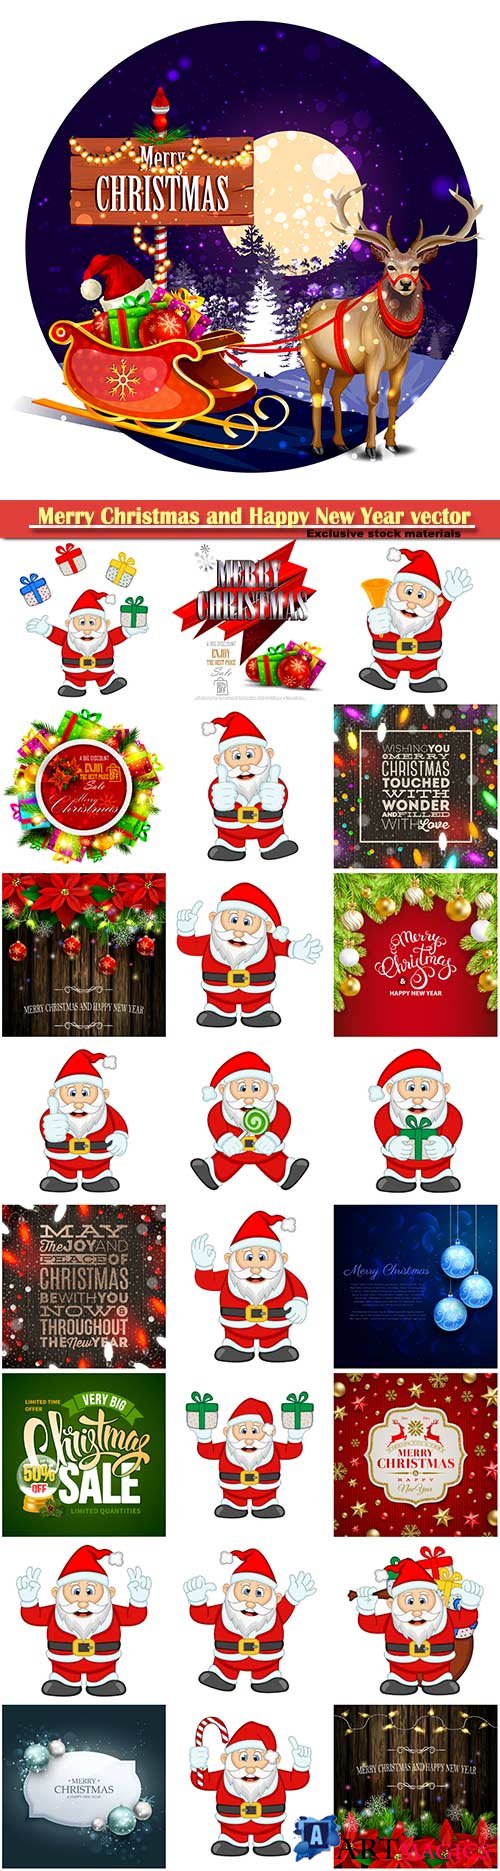 Merry Christmas and Happy New Year vector design # 34